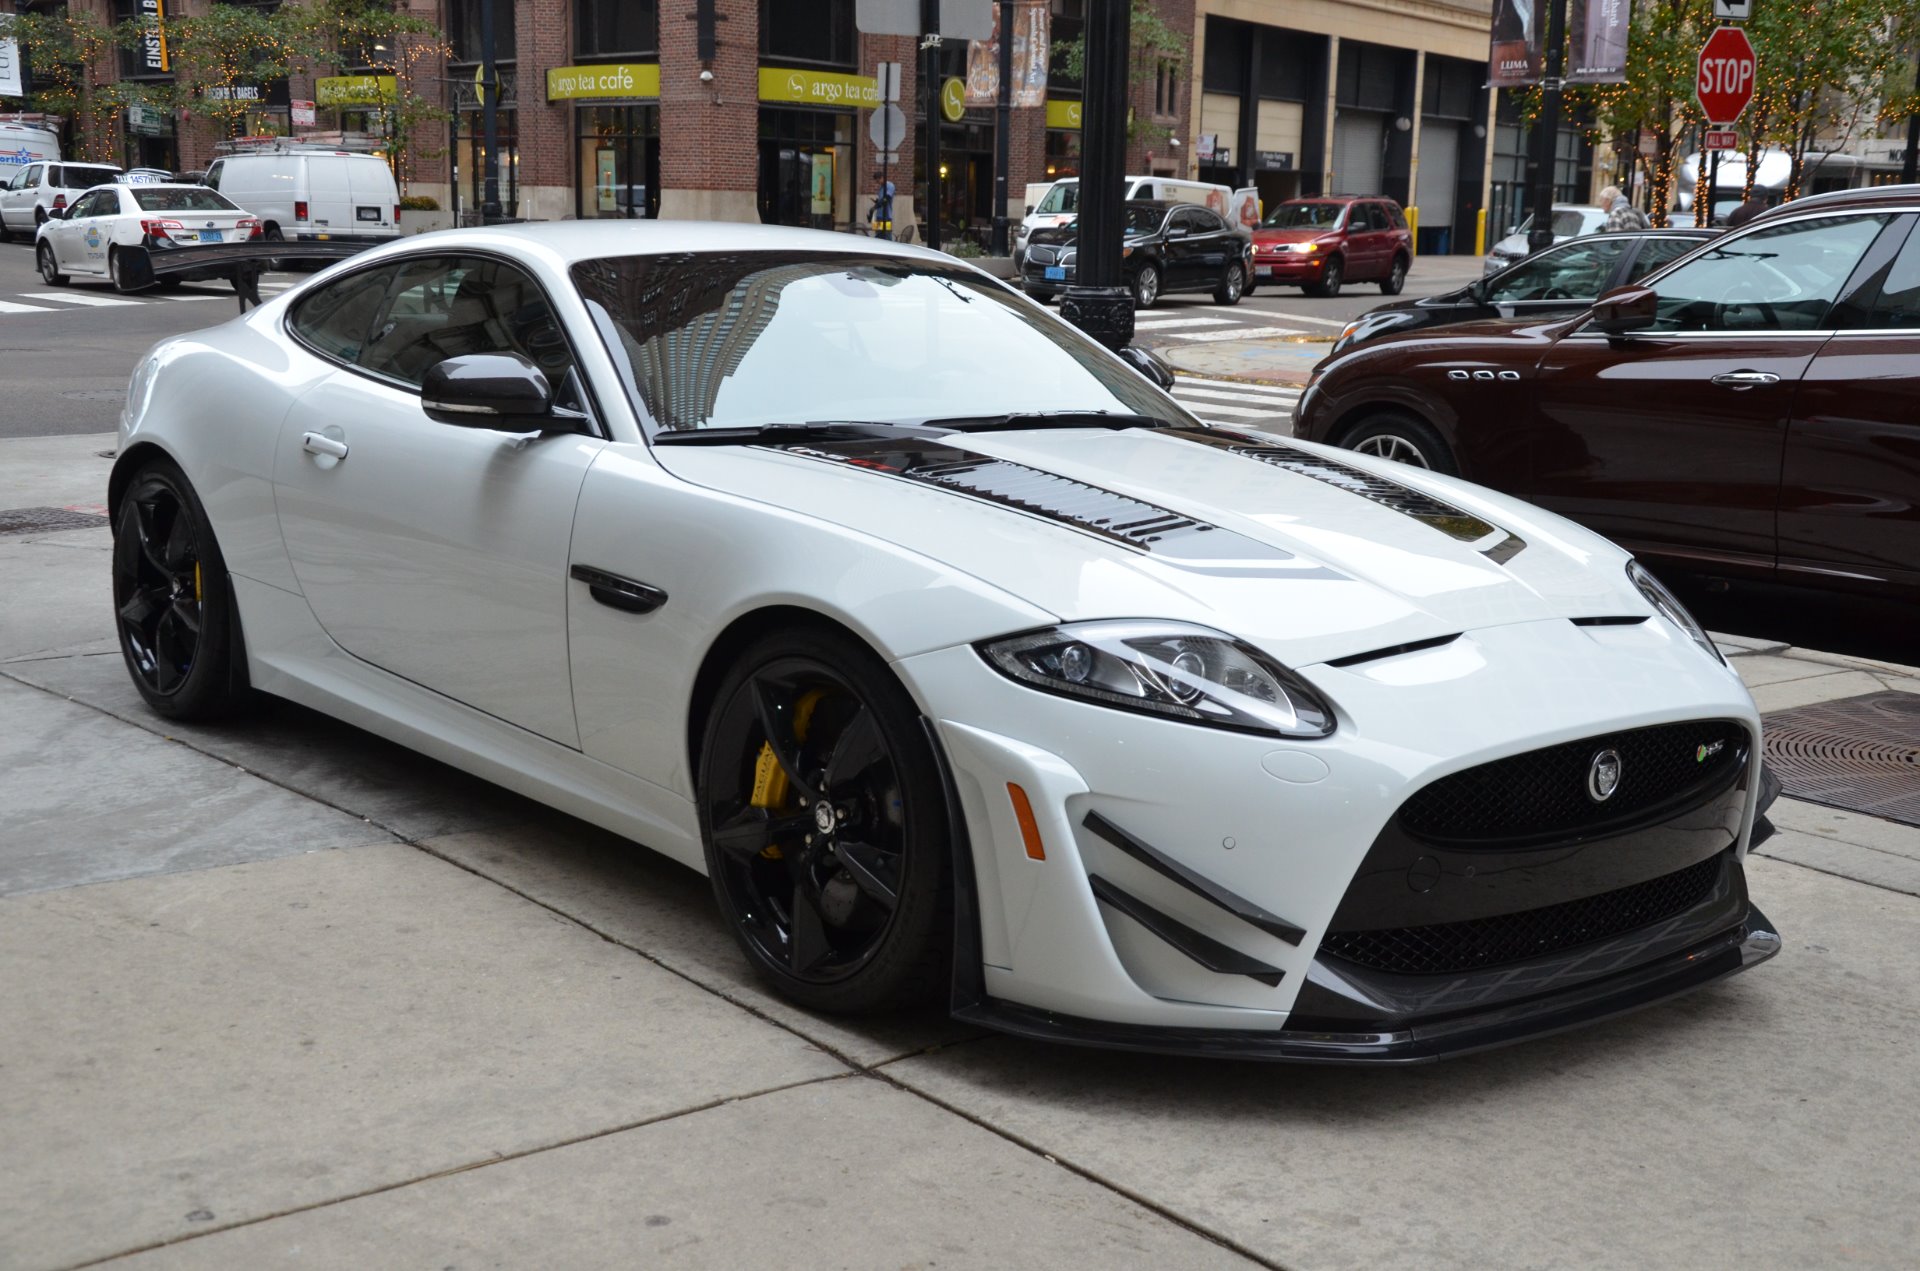 2014 Jaguar XKR-S GT 1 of 25 in USA XKR-S GT Stock # GC ...